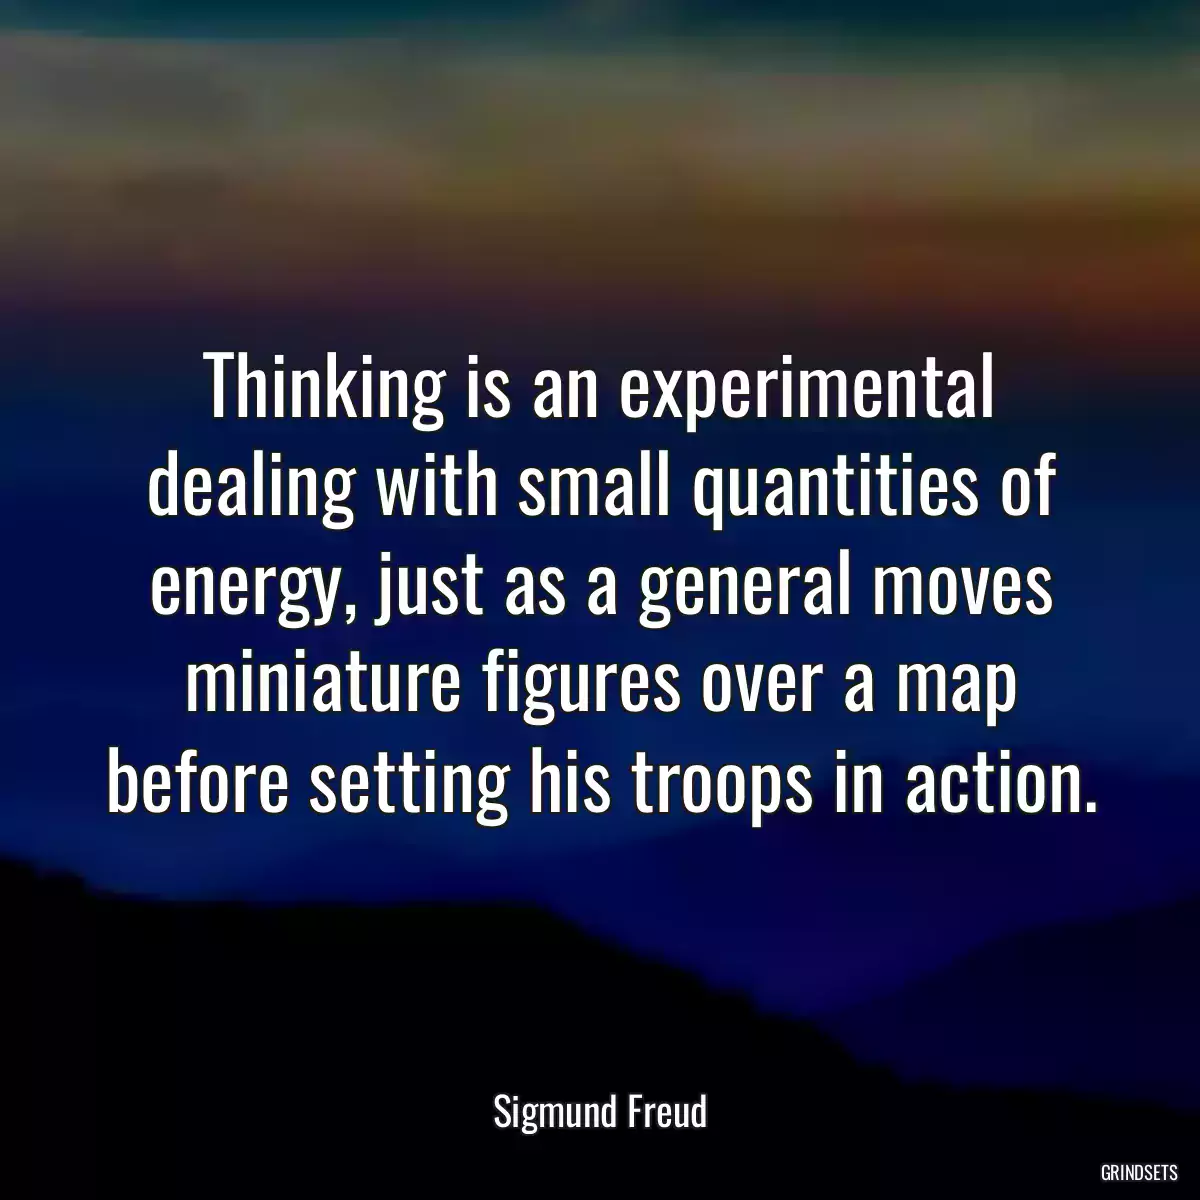 Thinking is an experimental dealing with small quantities of energy, just as a general moves miniature figures over a map before setting his troops in action.